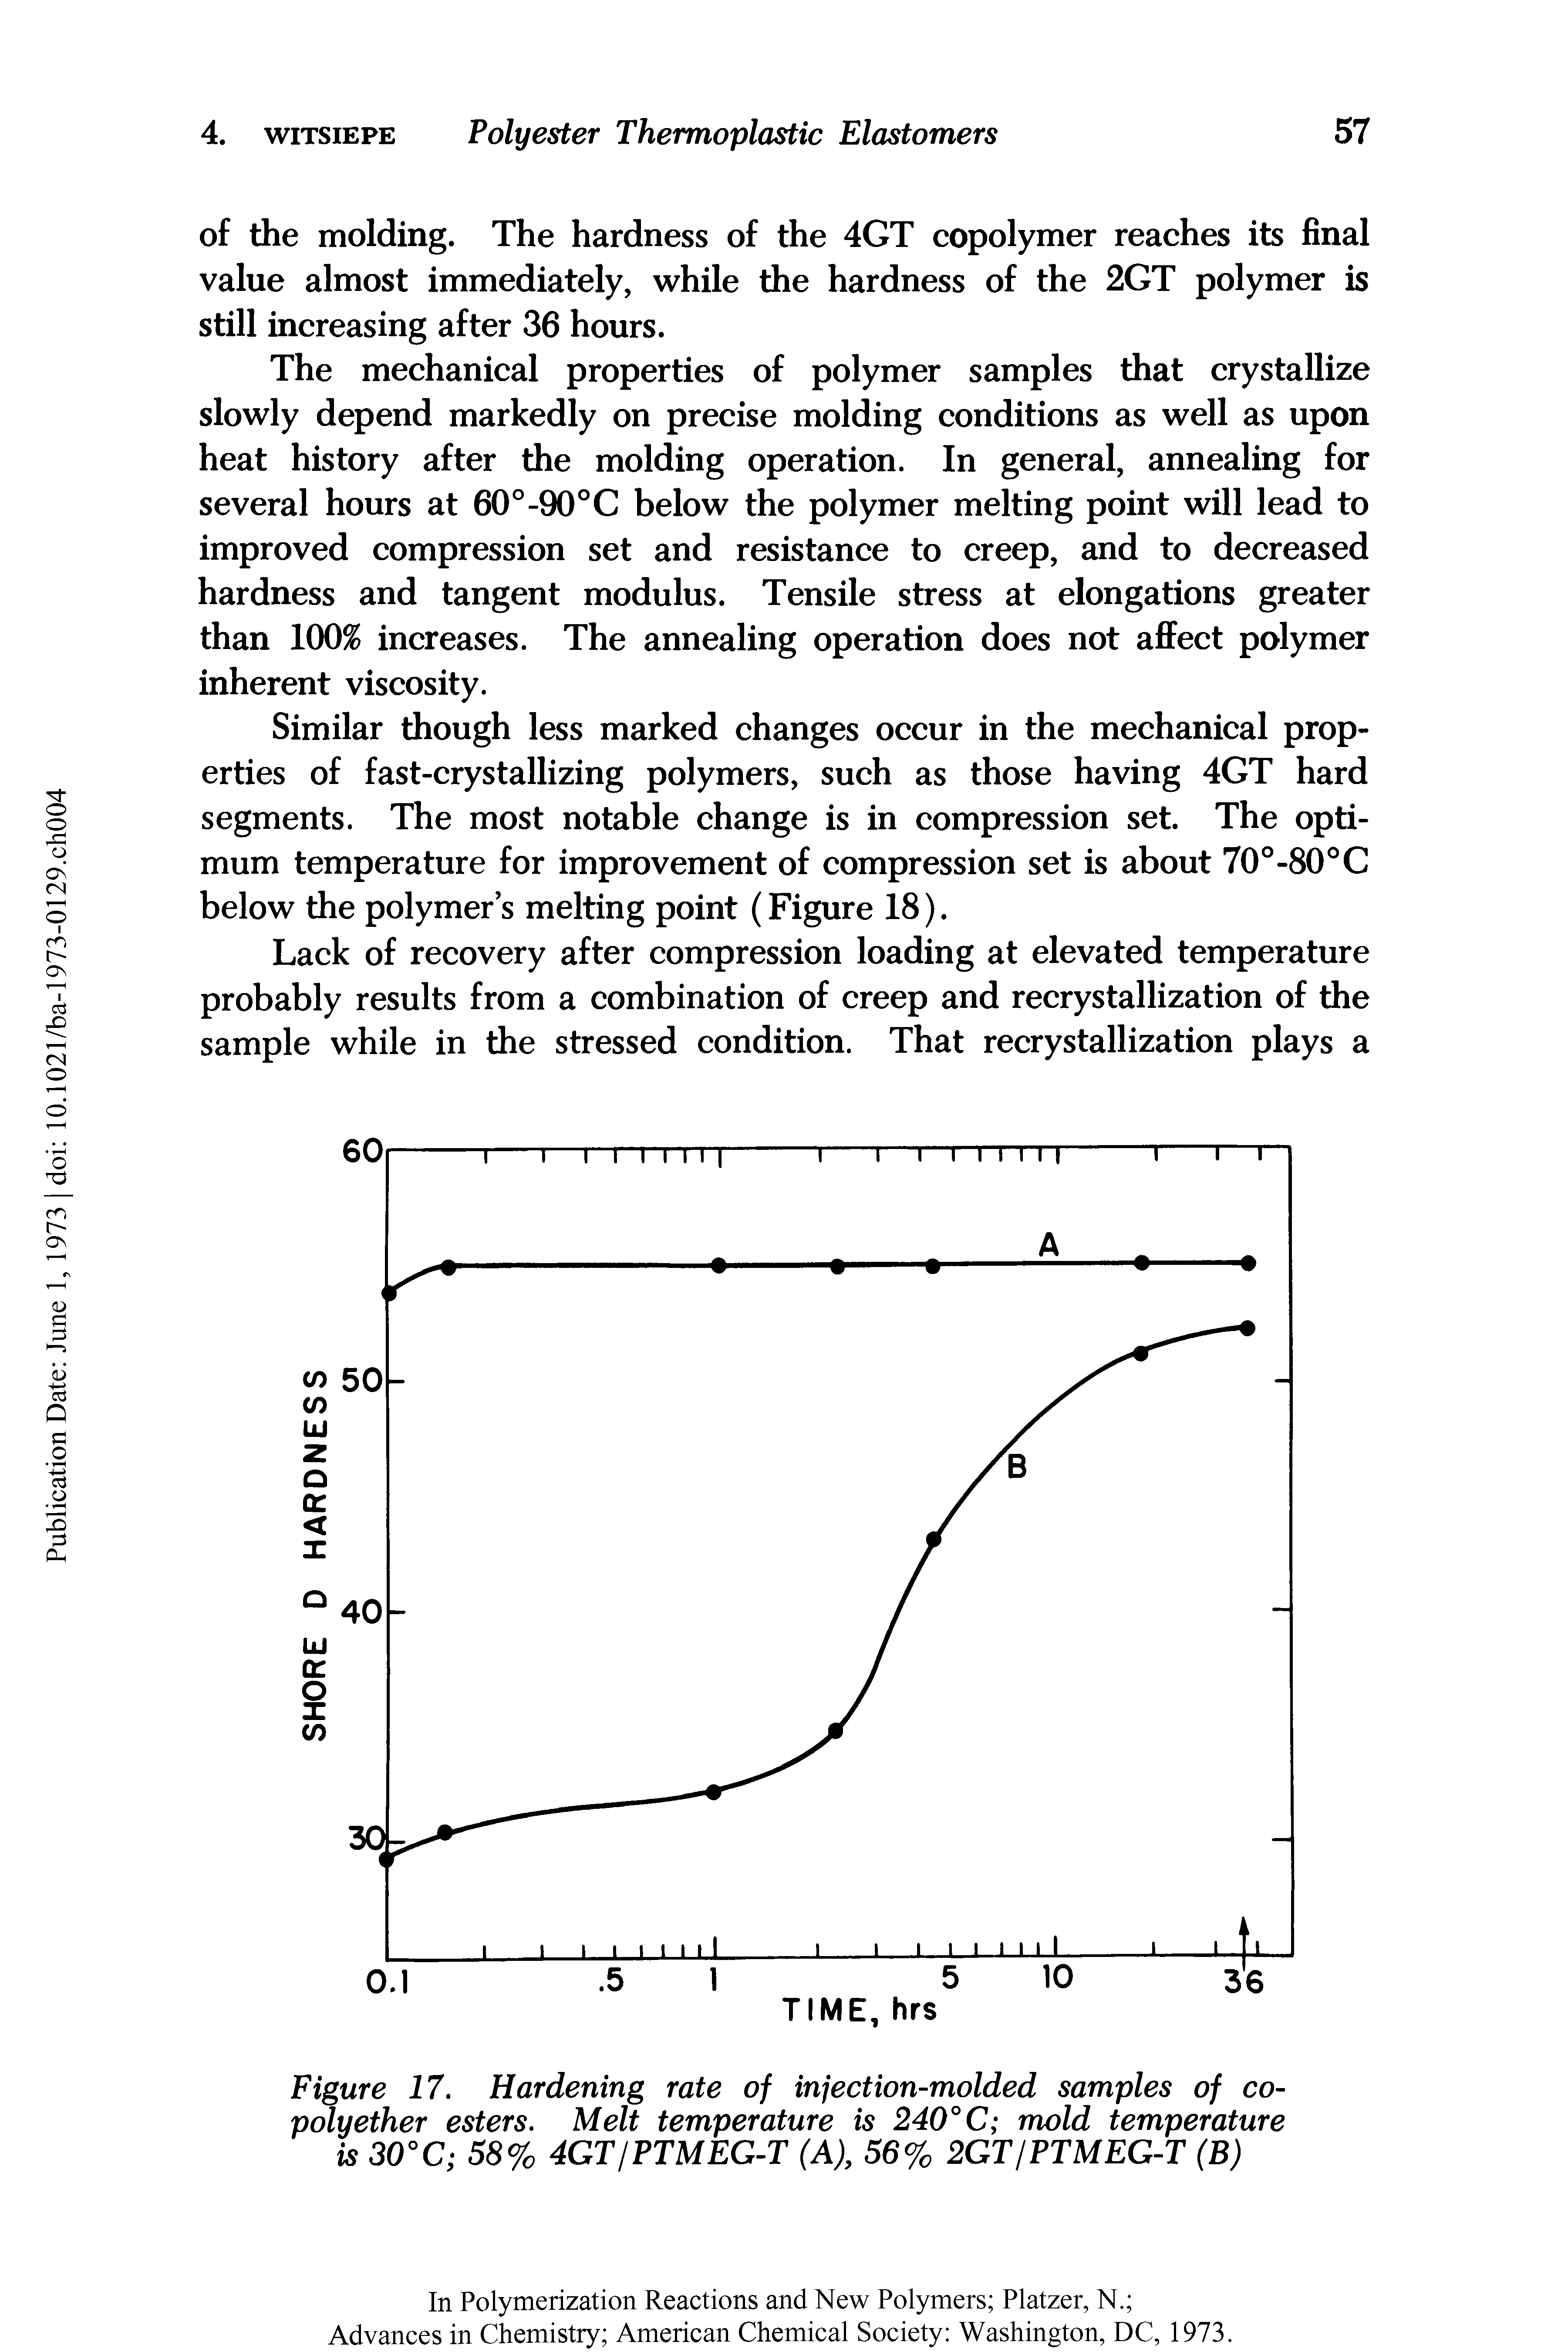 Figure 17. Hardening rate of injection-molded samples of copolyether esters. Melt temperature is 240°C mold temperature is 30°C 58% 4GT/PTMEG-T (A), 56% 2GT/PTMEG-T (B)...